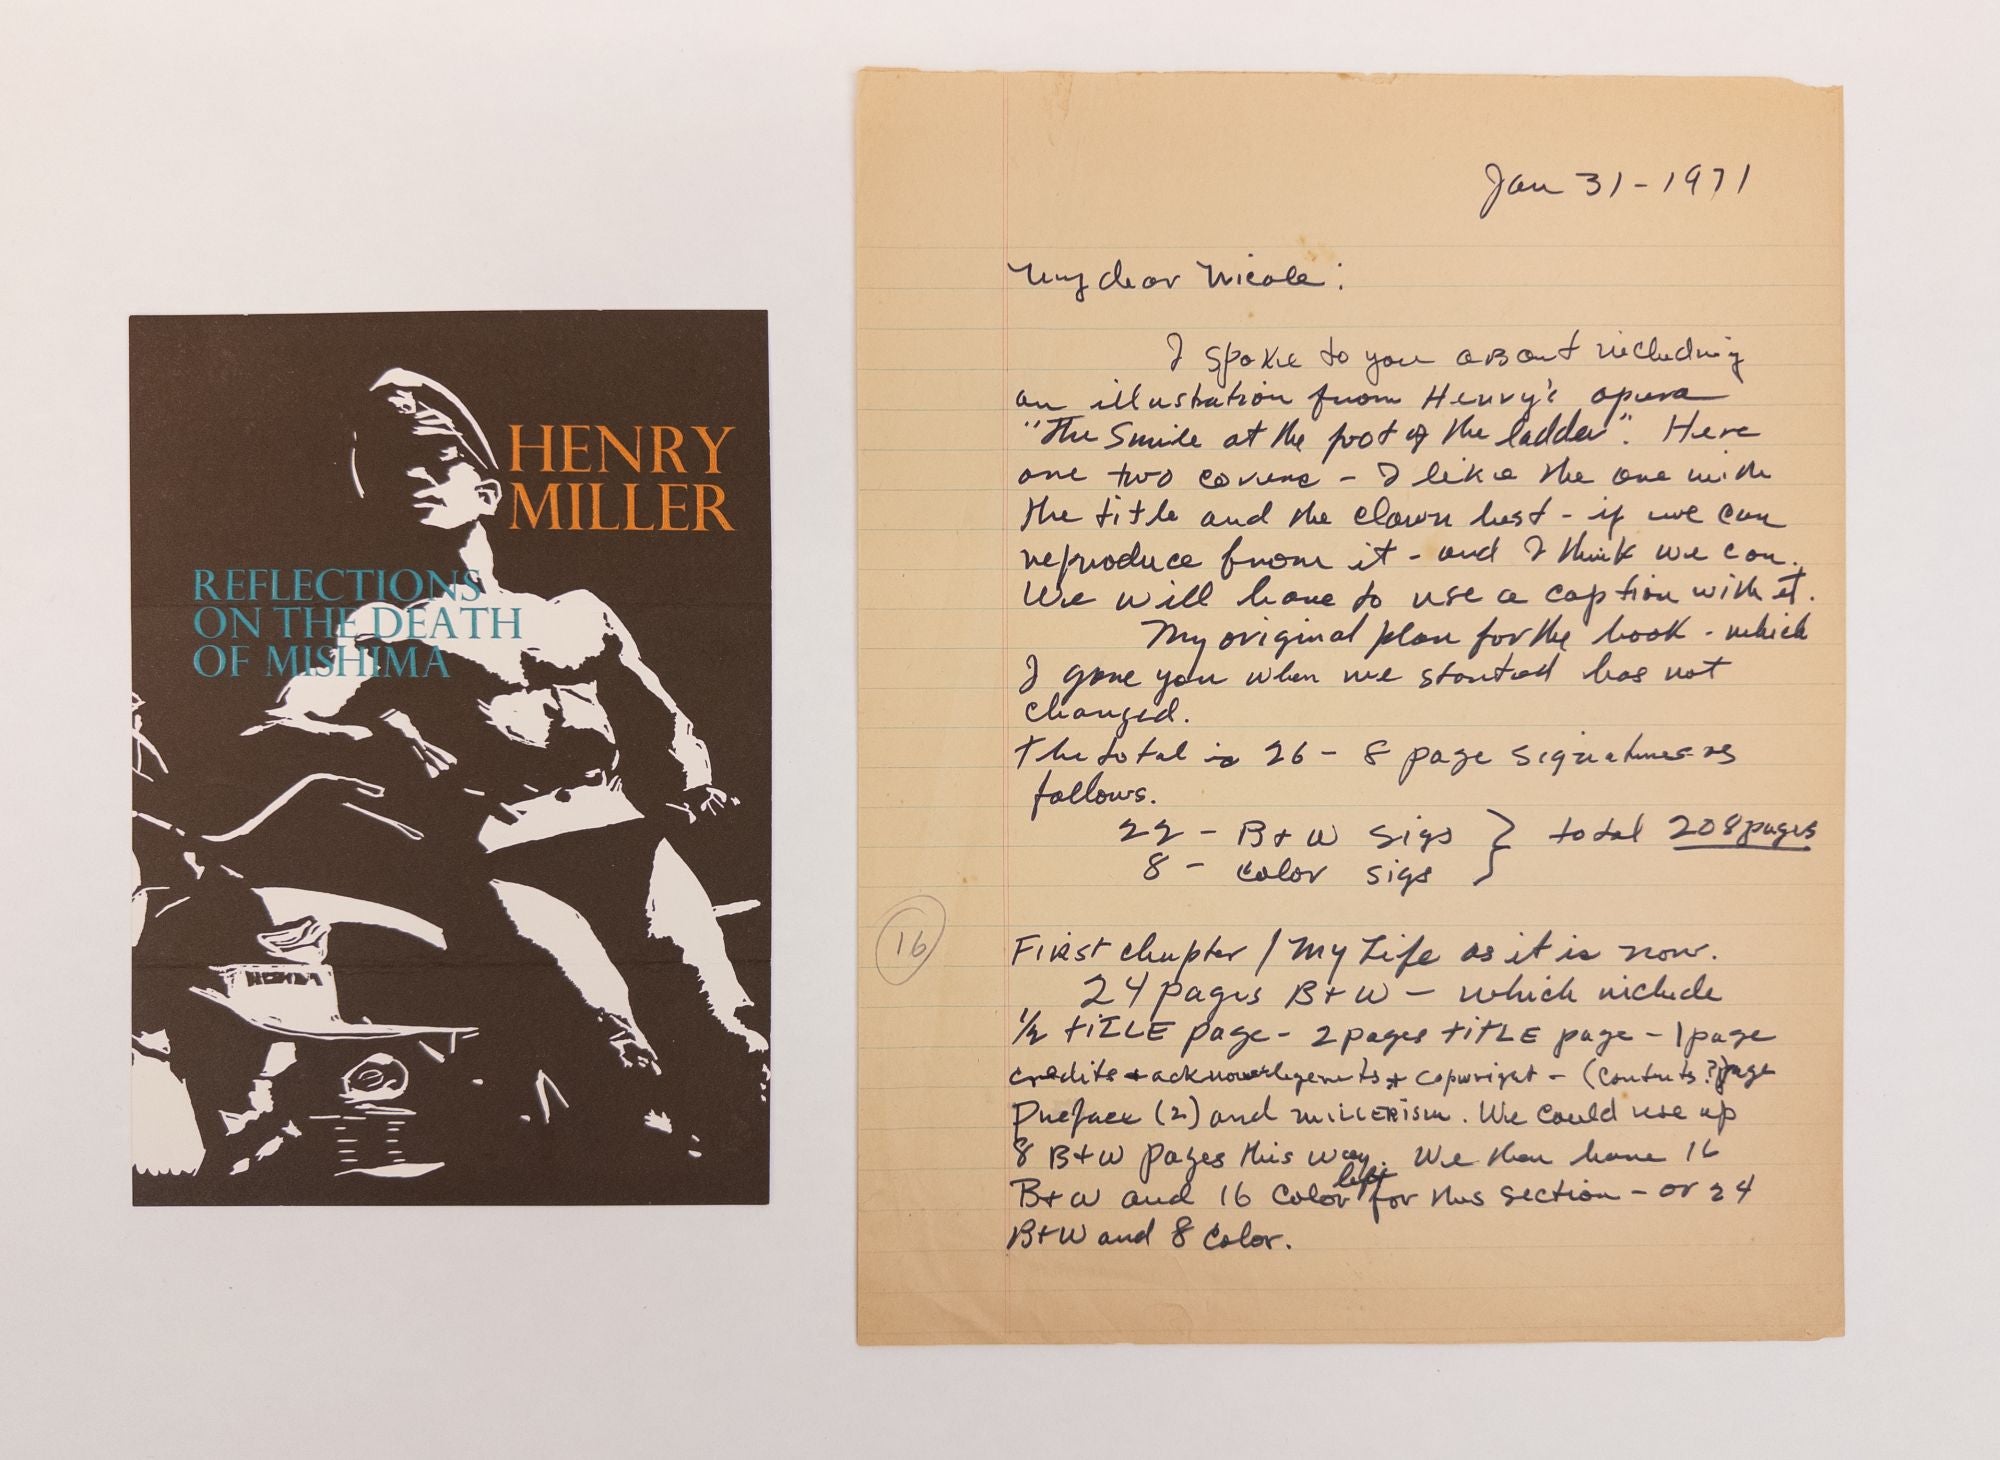 Product Image for HENRY MILLER: FIFTEEN ITEM MINI-ARCHIVE